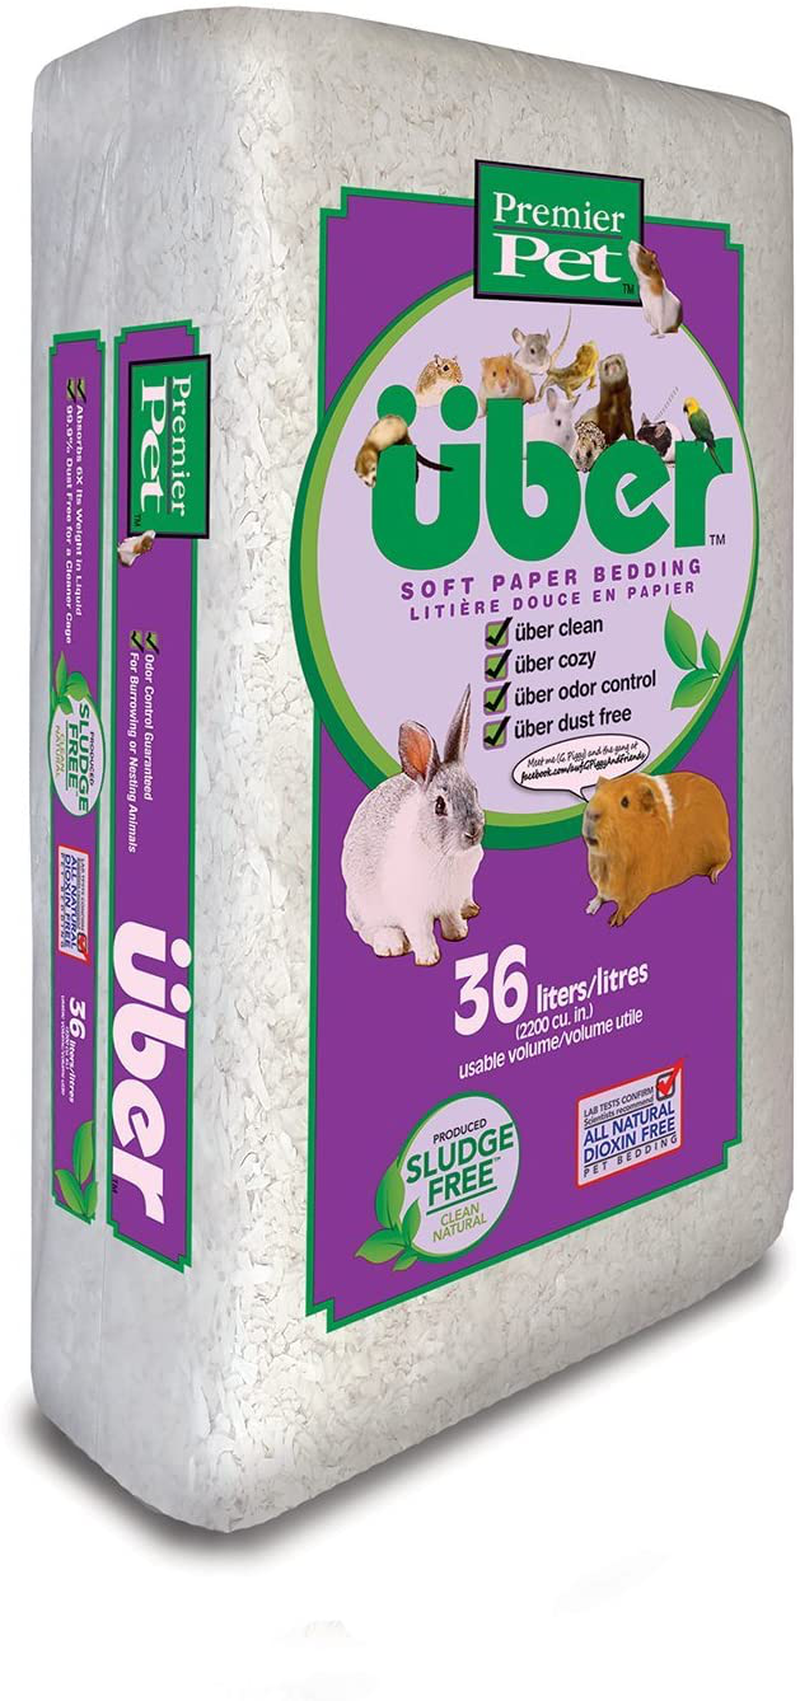 Premier Pet Premium Uber Paper Bedding Cozy and Fun for Small Animal Bedding, 500, White